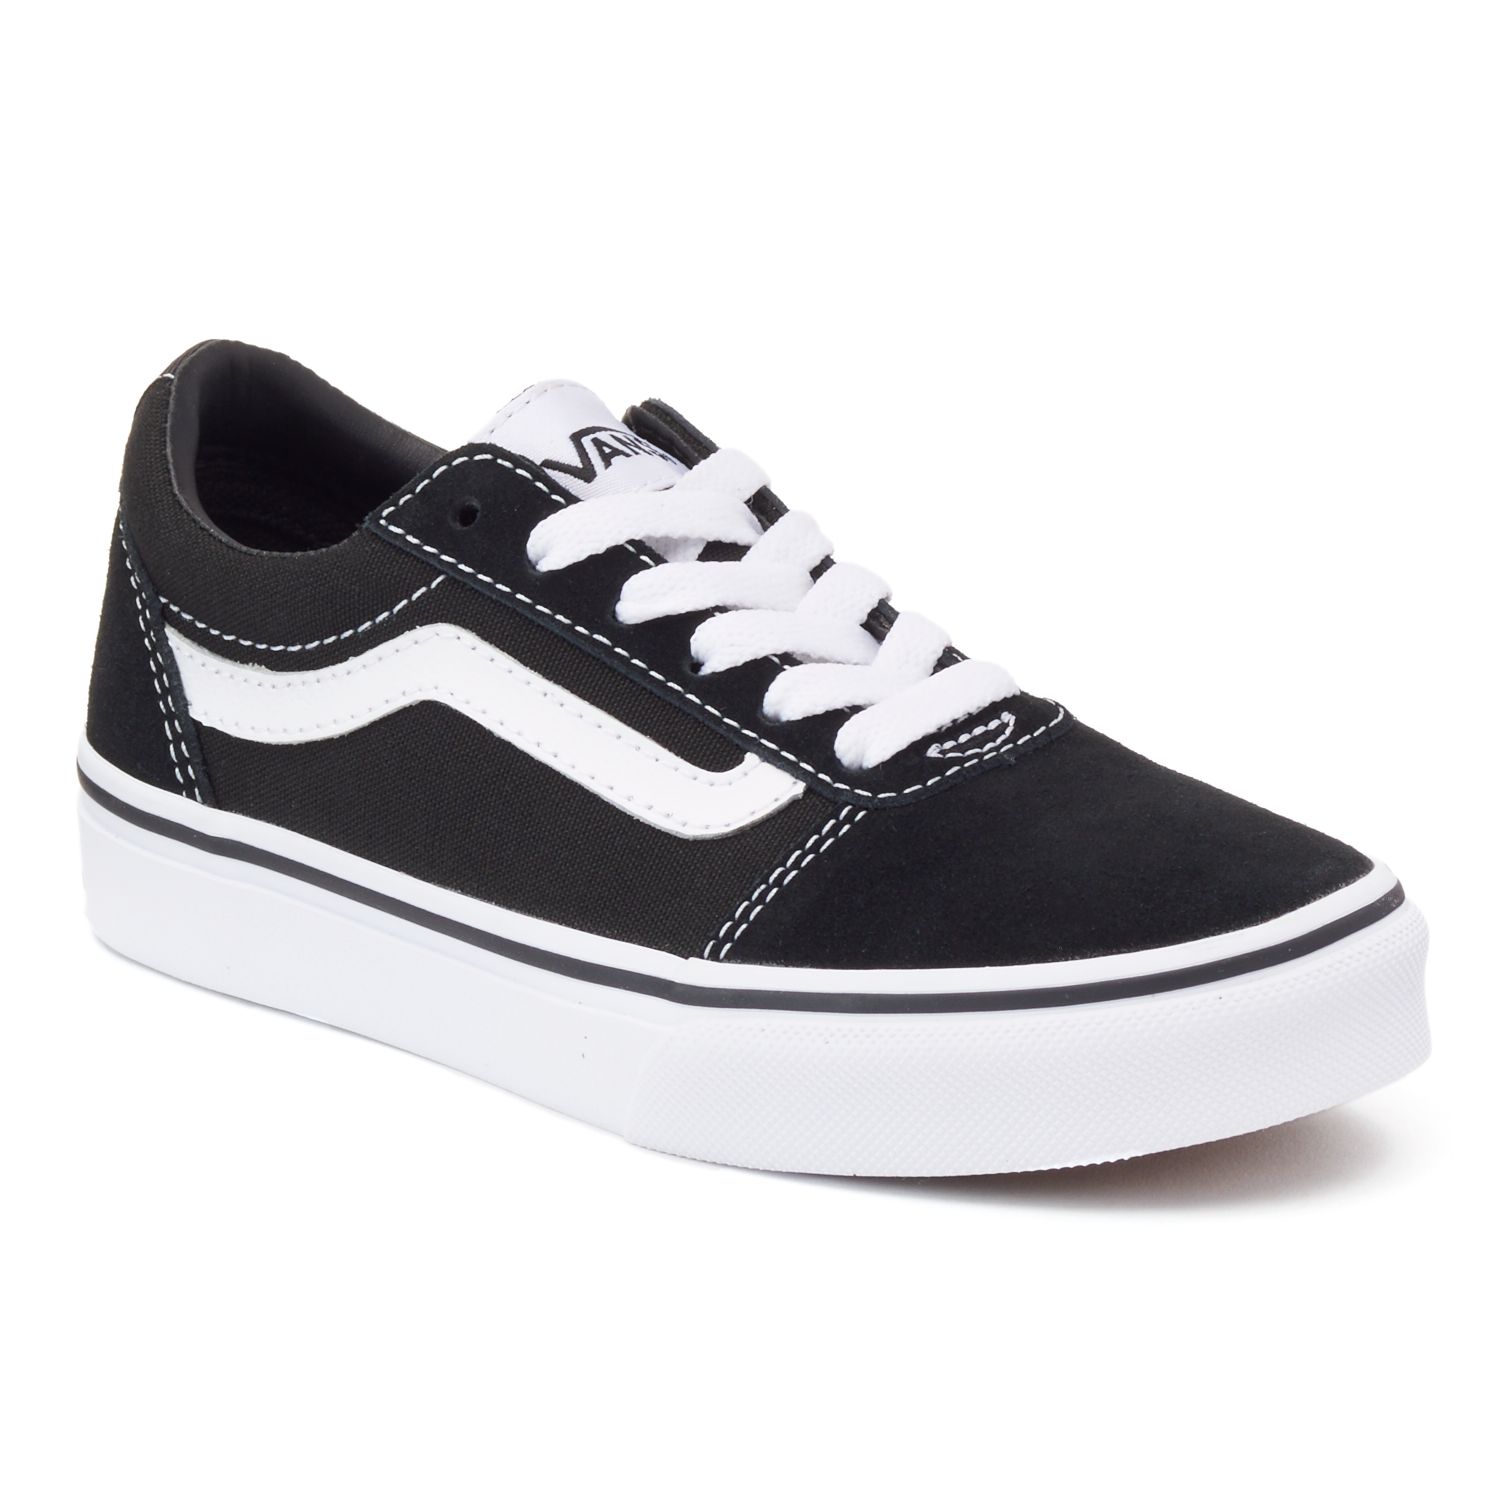 vans youth shoes on sale cheap online